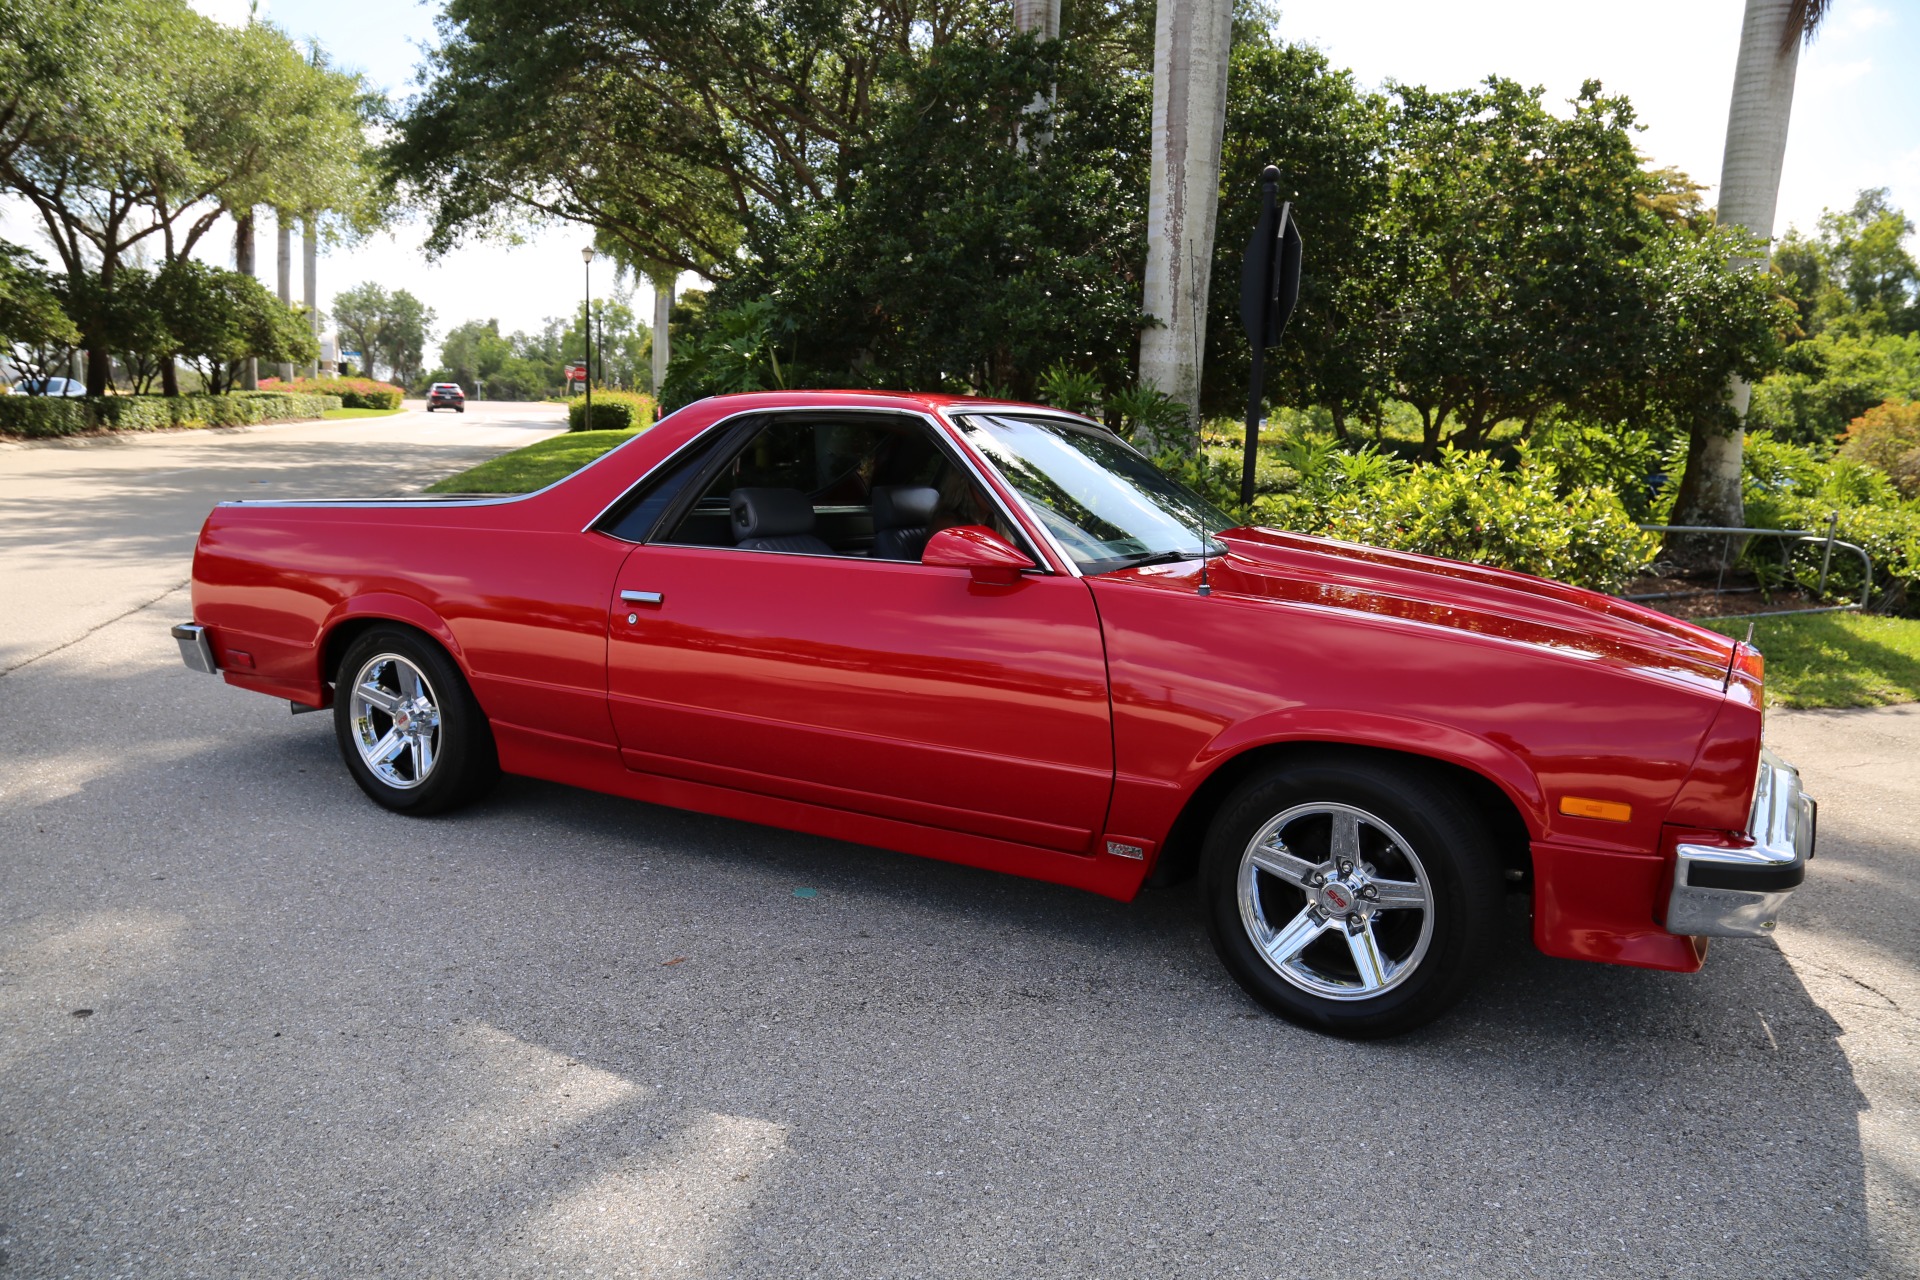 Used 1986 GMC Caballero LS Corvette Swap for sale Sold at Muscle Cars for Sale Inc. in Fort Myers FL 33912 3